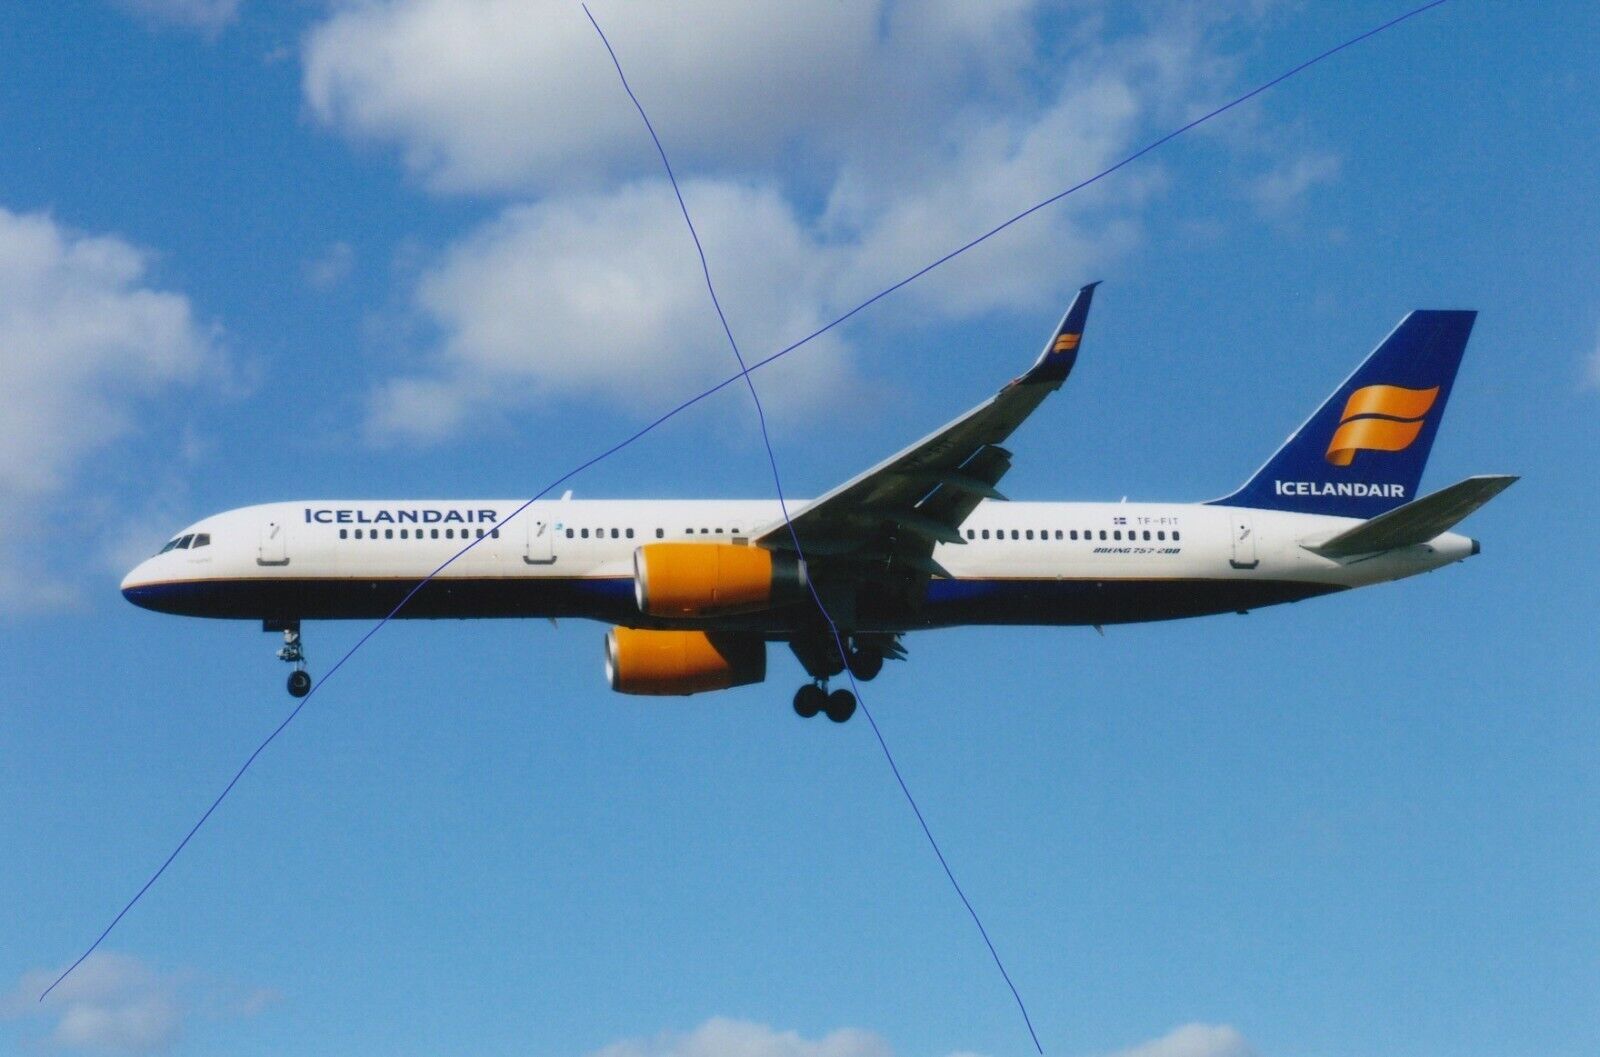 ICELANDAIR PLANE PHOTO CIVIL AIRCRAFT BOEING 757 PICTURE TF-FIT ON A PHOTOGRAPH 